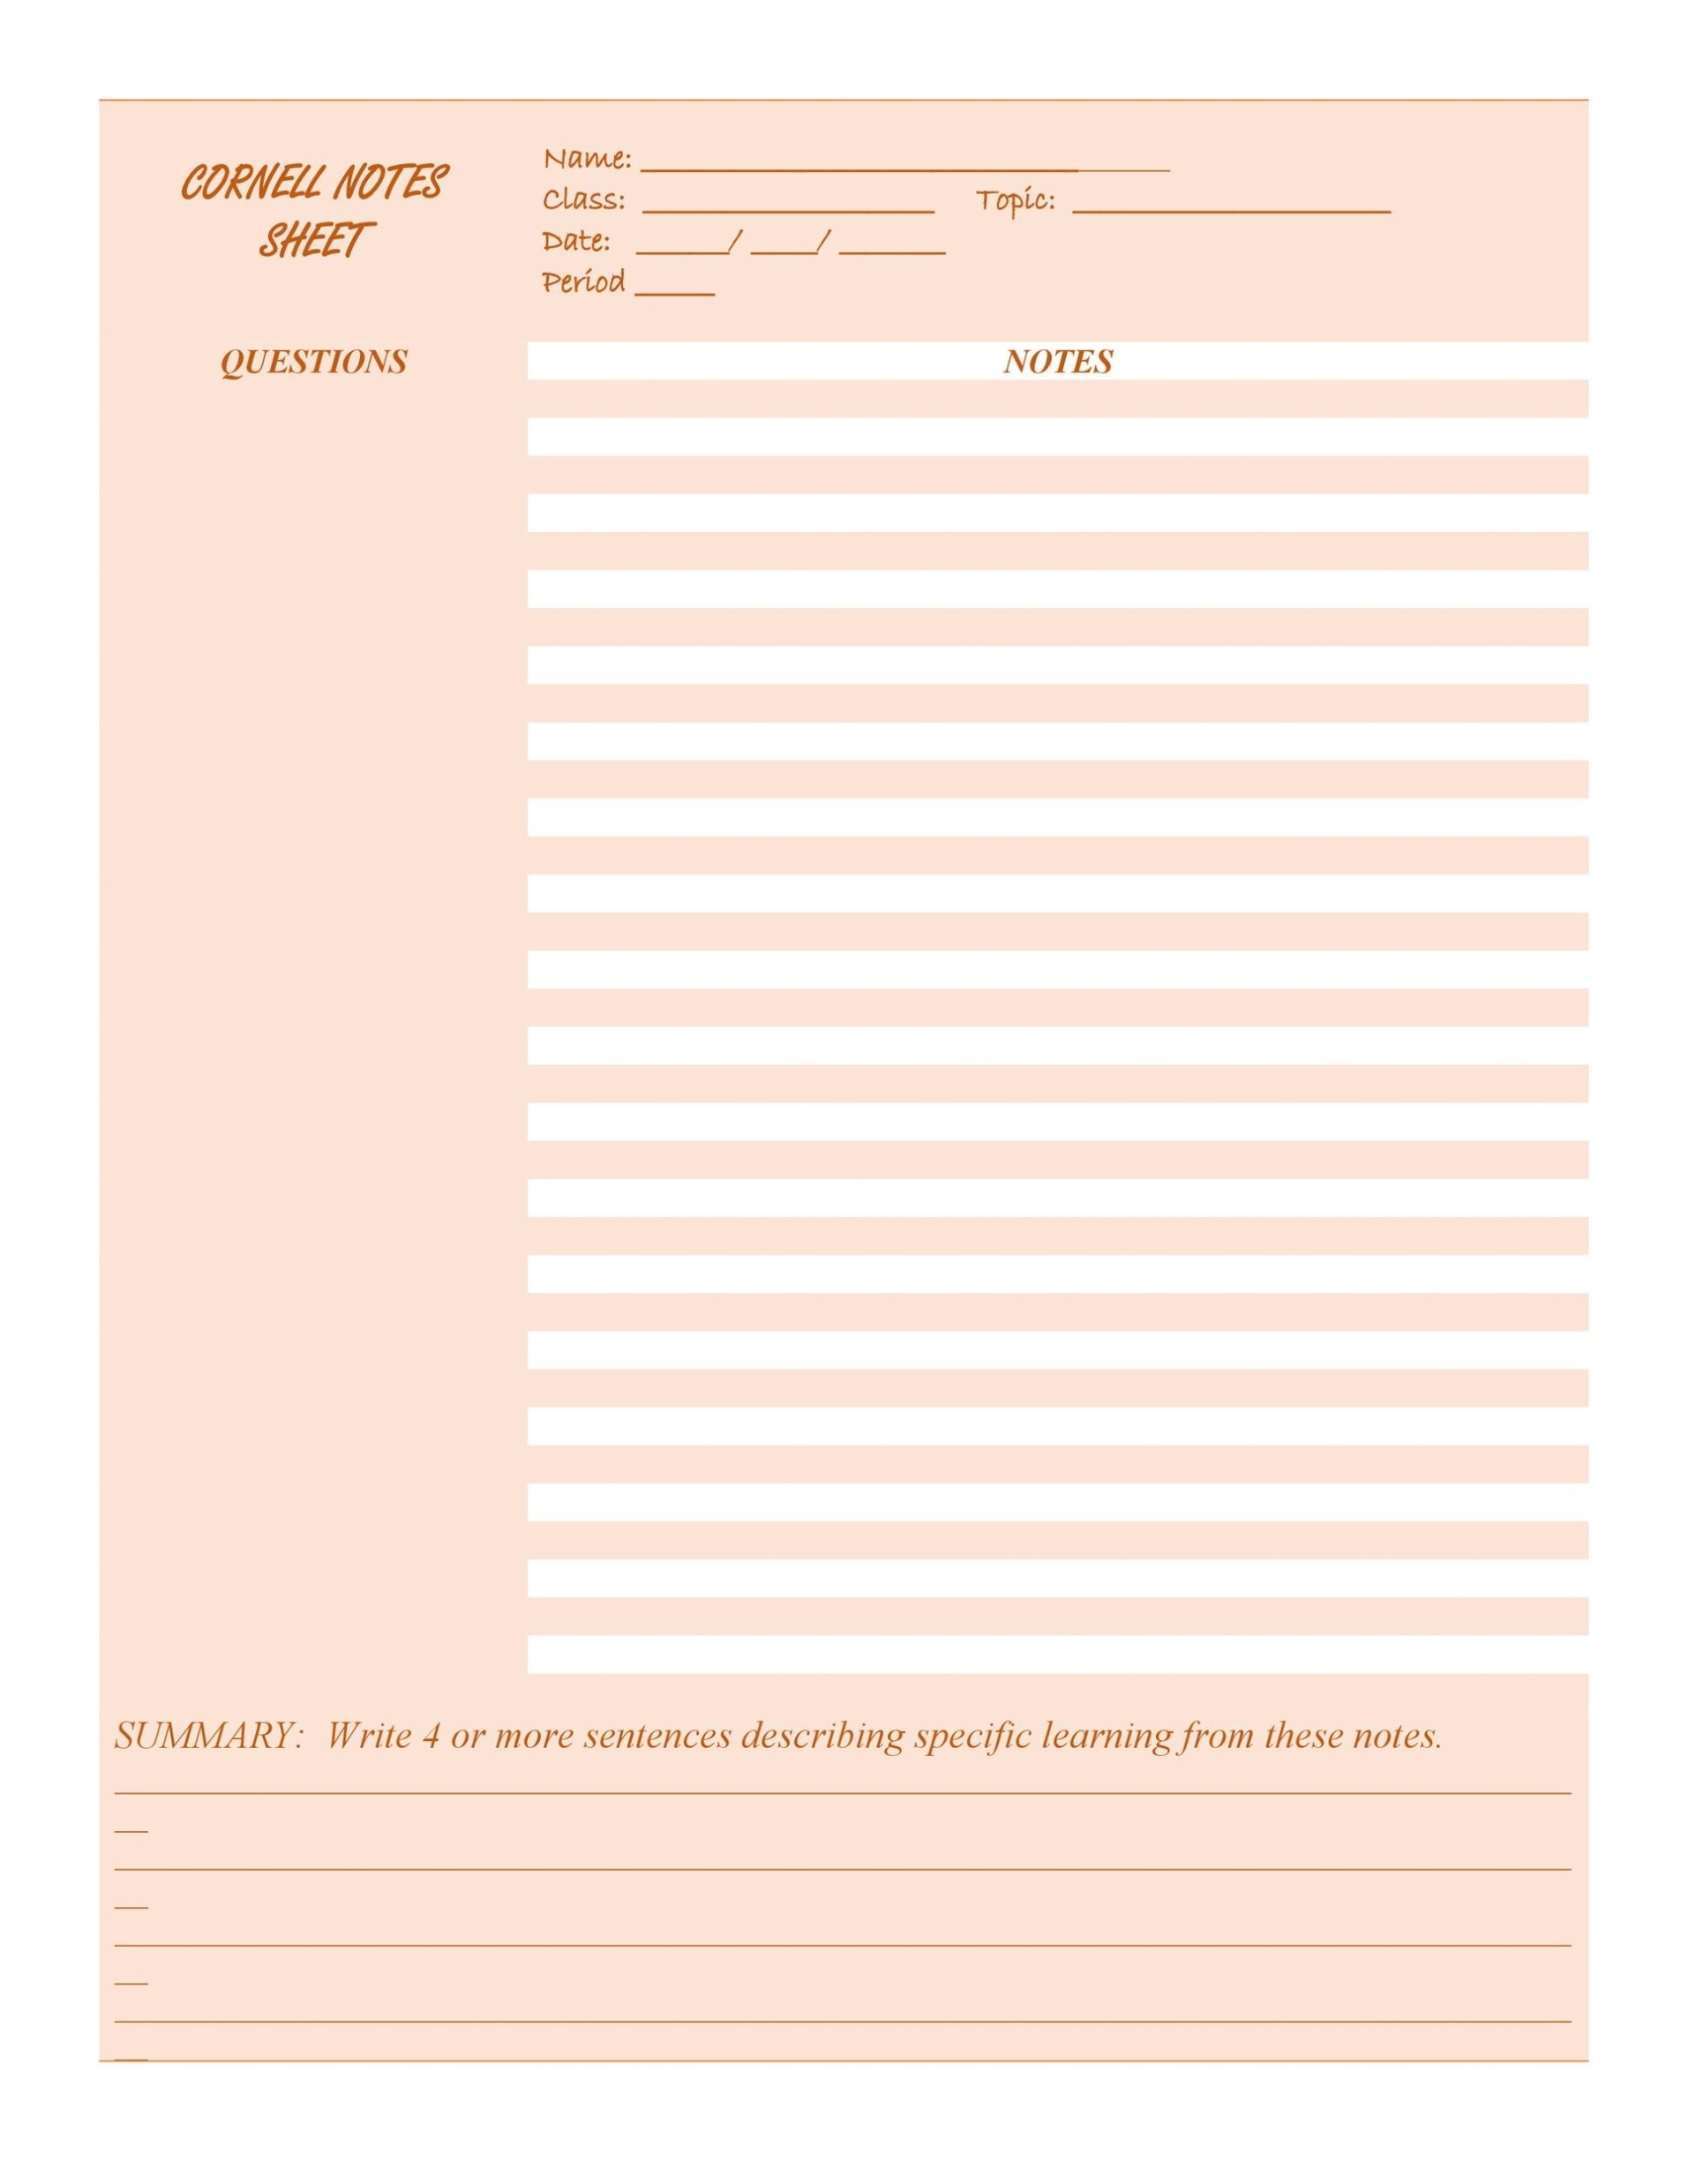 37 Cornell Notes Templates &amp; Examples [Word, Excel, Pdf] ᐅ throughout Cornell Notes Template Doc